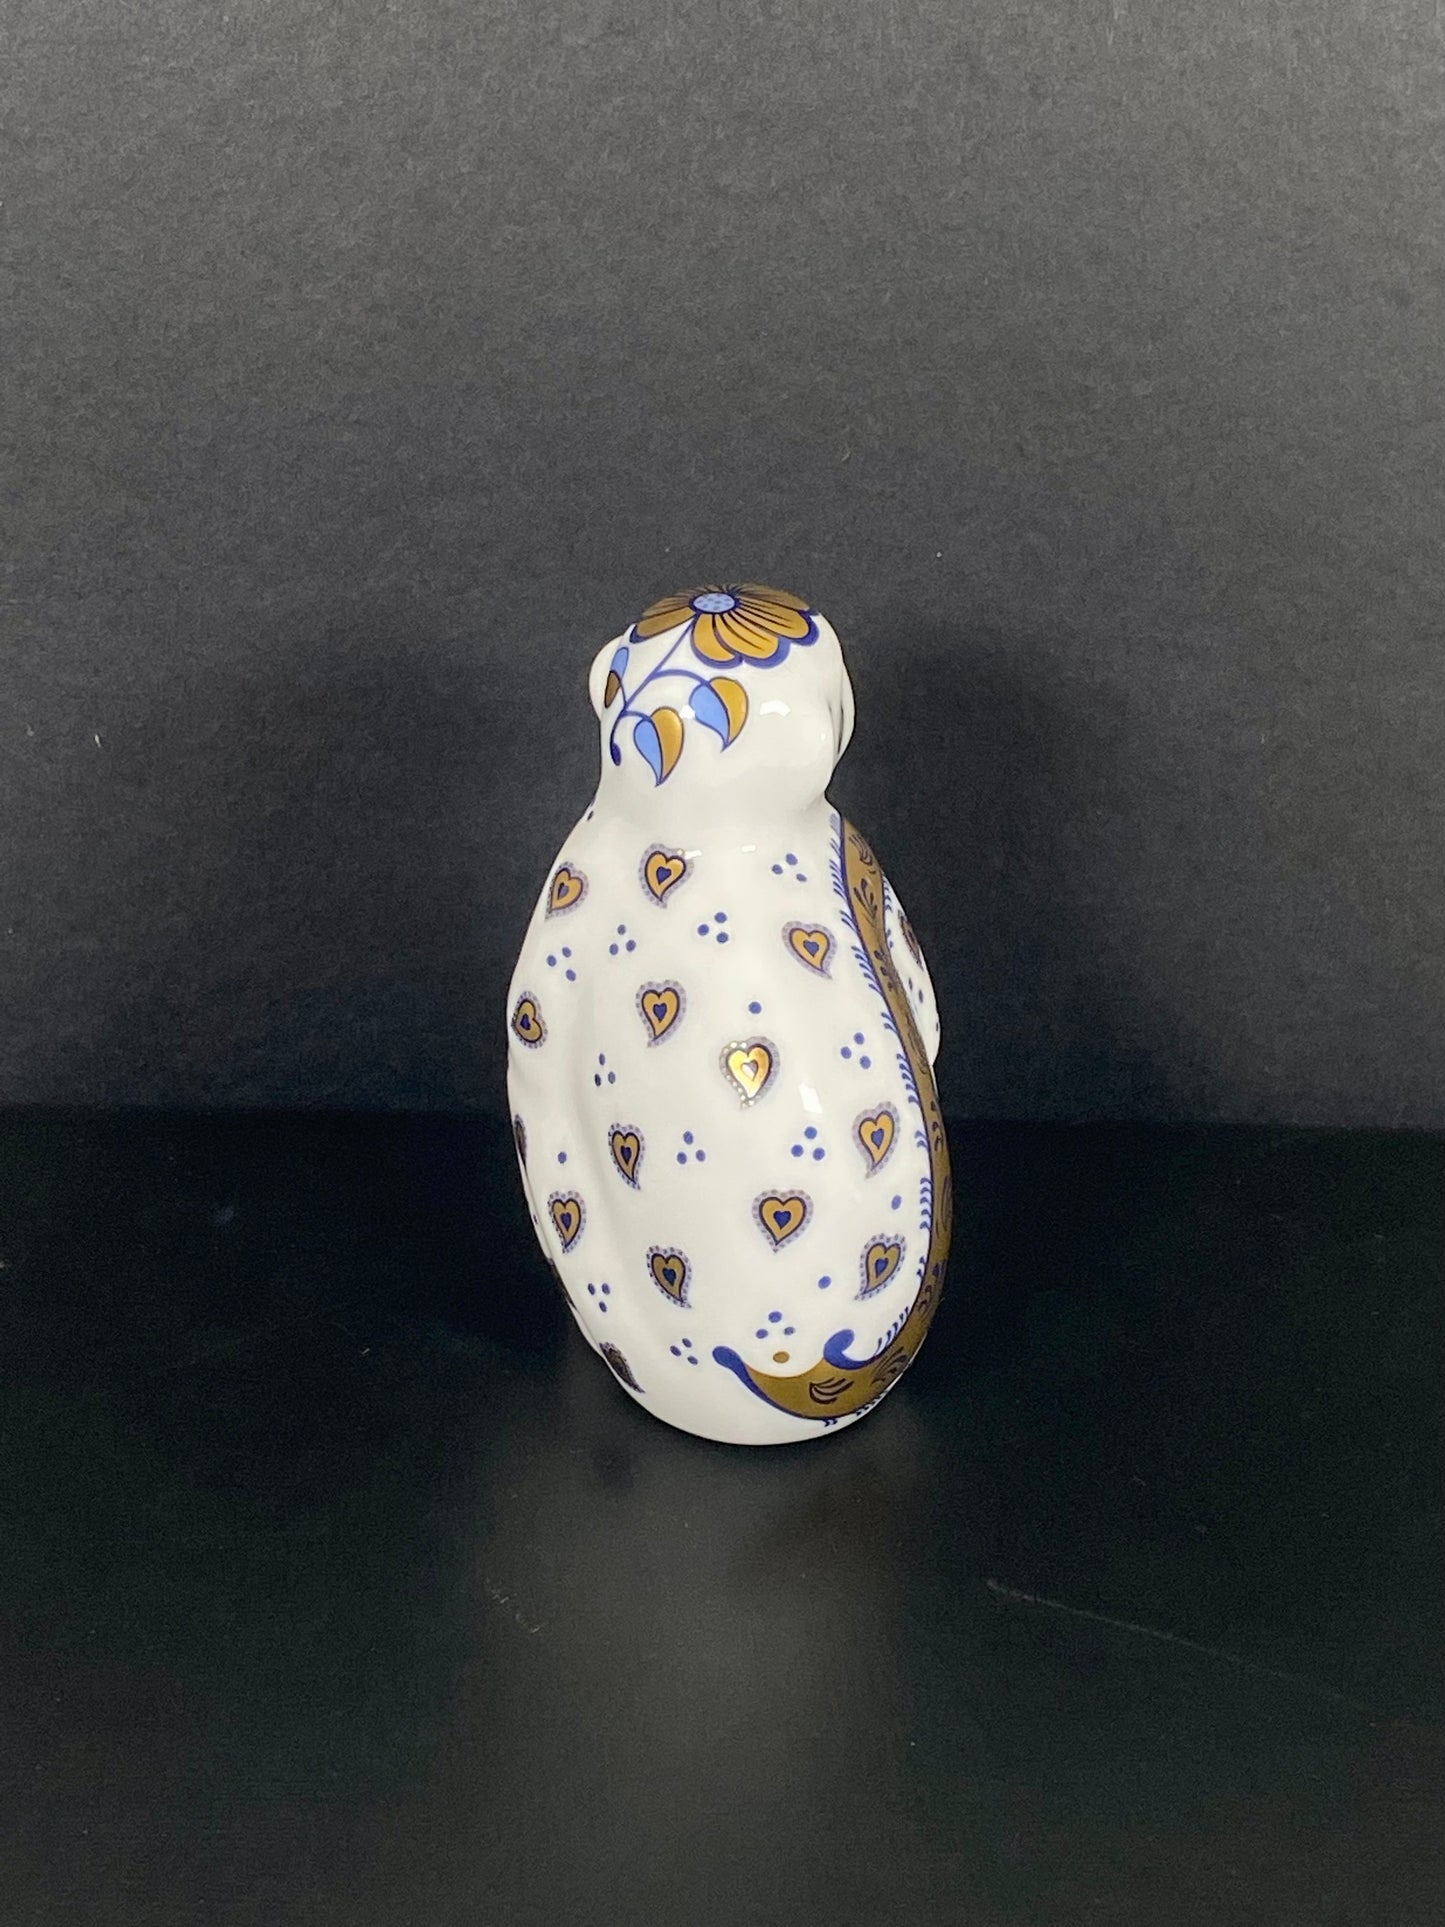 Vintage Royal Crown Derby Cobalt and Gilt Limited Edition Monkey Porcelain Paperweight or Figurine